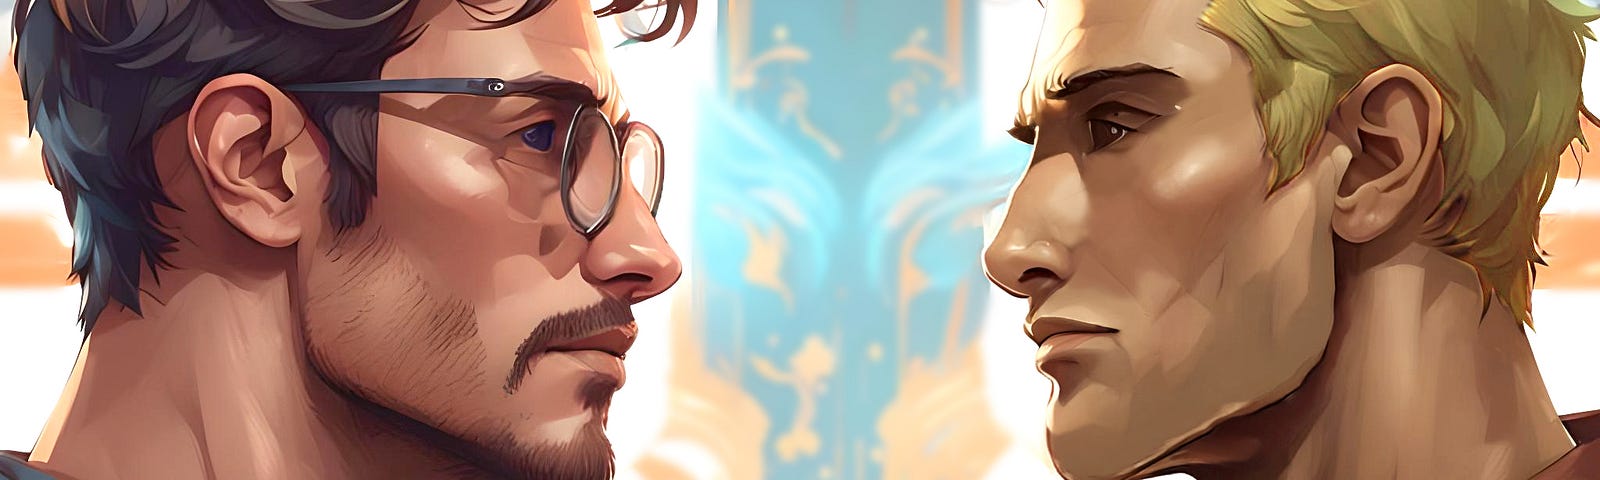 Two handsome men facing each other. Cameron on the left, dark hair, short beard, glasses. Jonathan on the right, blond hair, clean shave, stronger build.